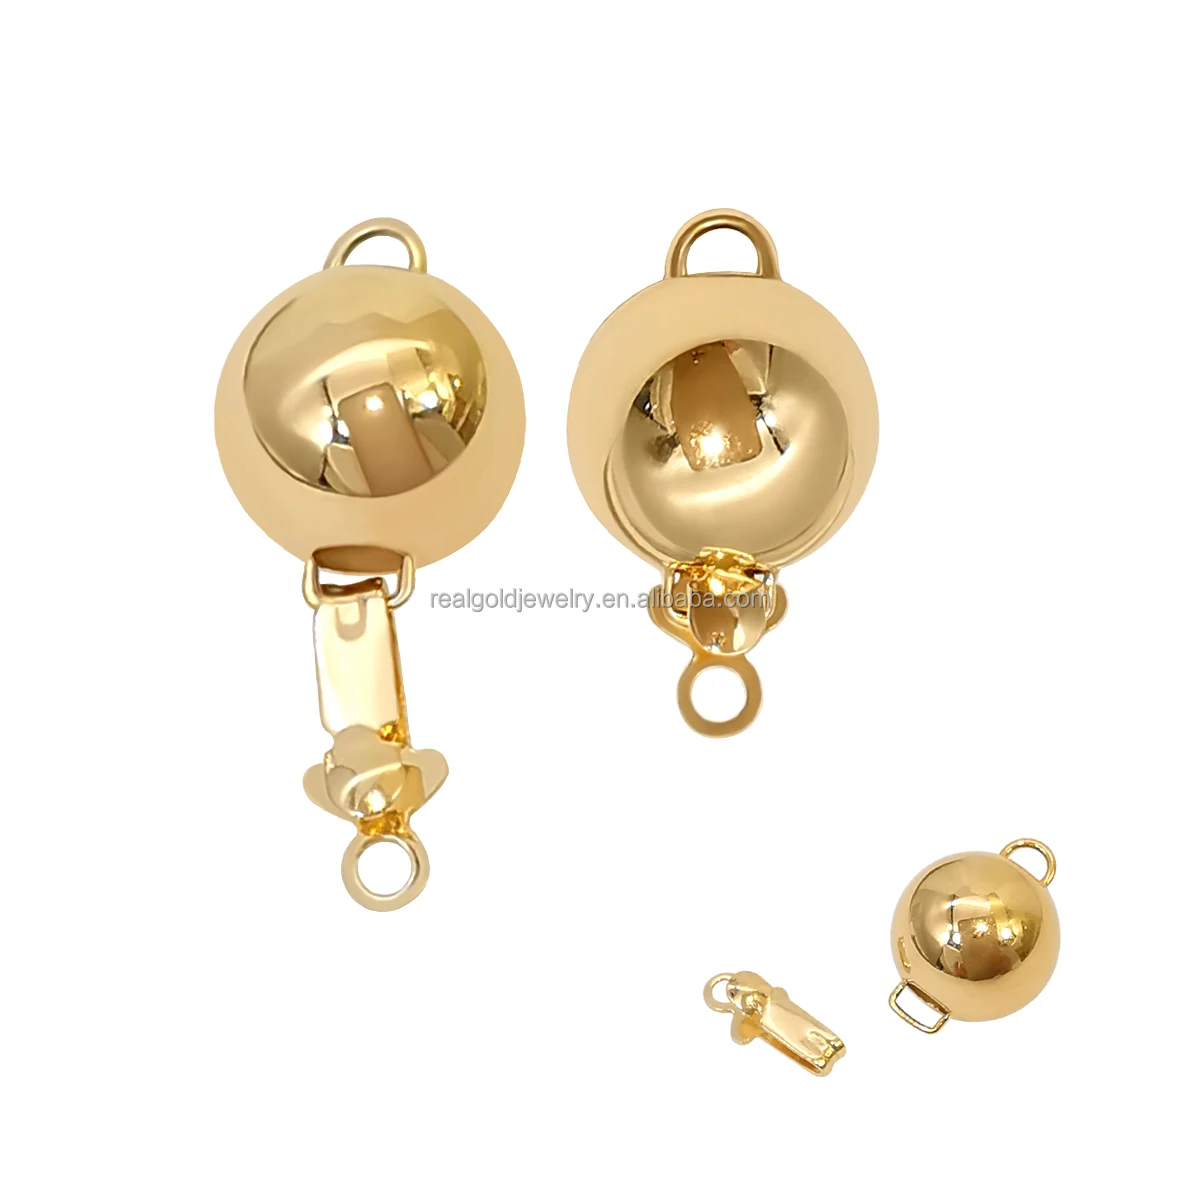 

Fine Jewelry 18K Au750 Real Gold Polished Round Ball Lock Clasps Connector for Pearl Necklace DIY Jewelry Accessories